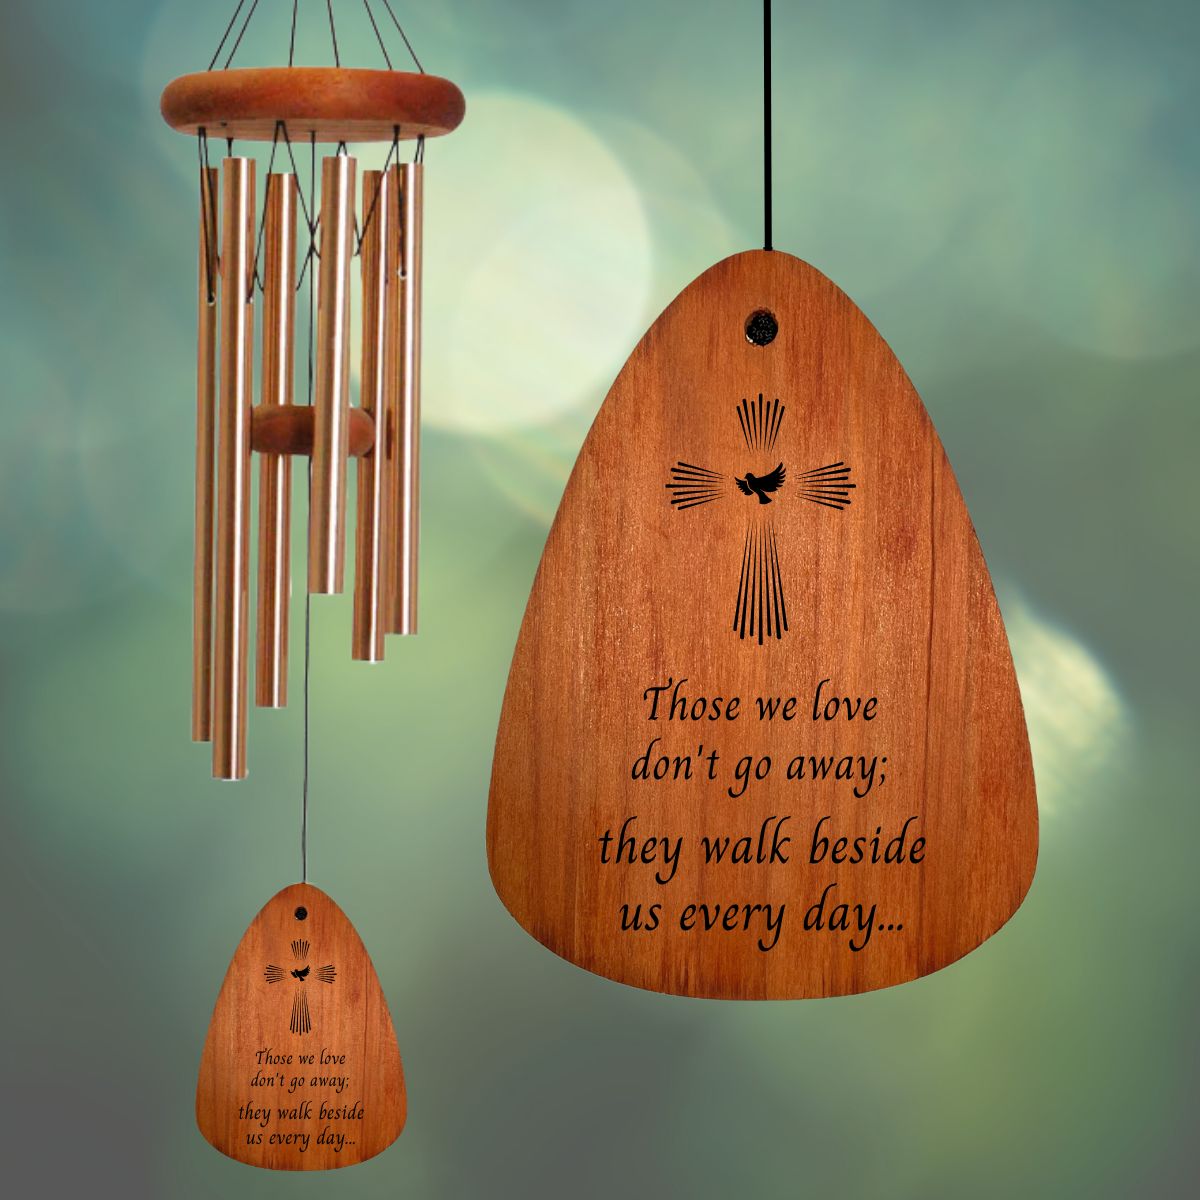 Festival 24-inch 6-Tube Wind chime in Copper - Those we love don't go away...